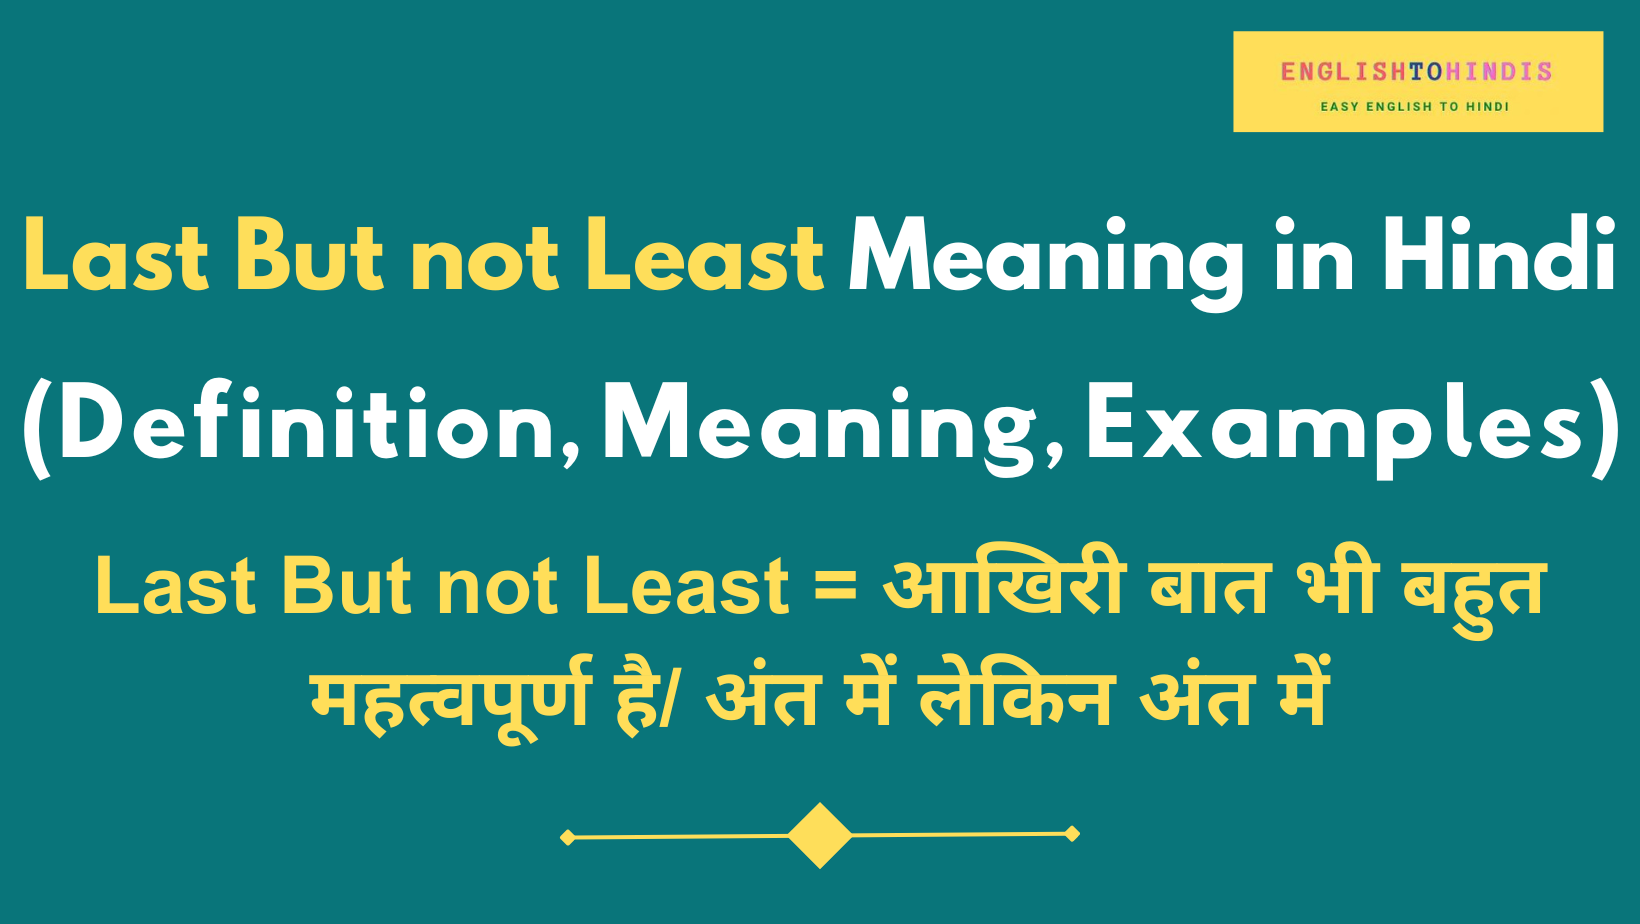 Last But not Least Meaning in Hindi